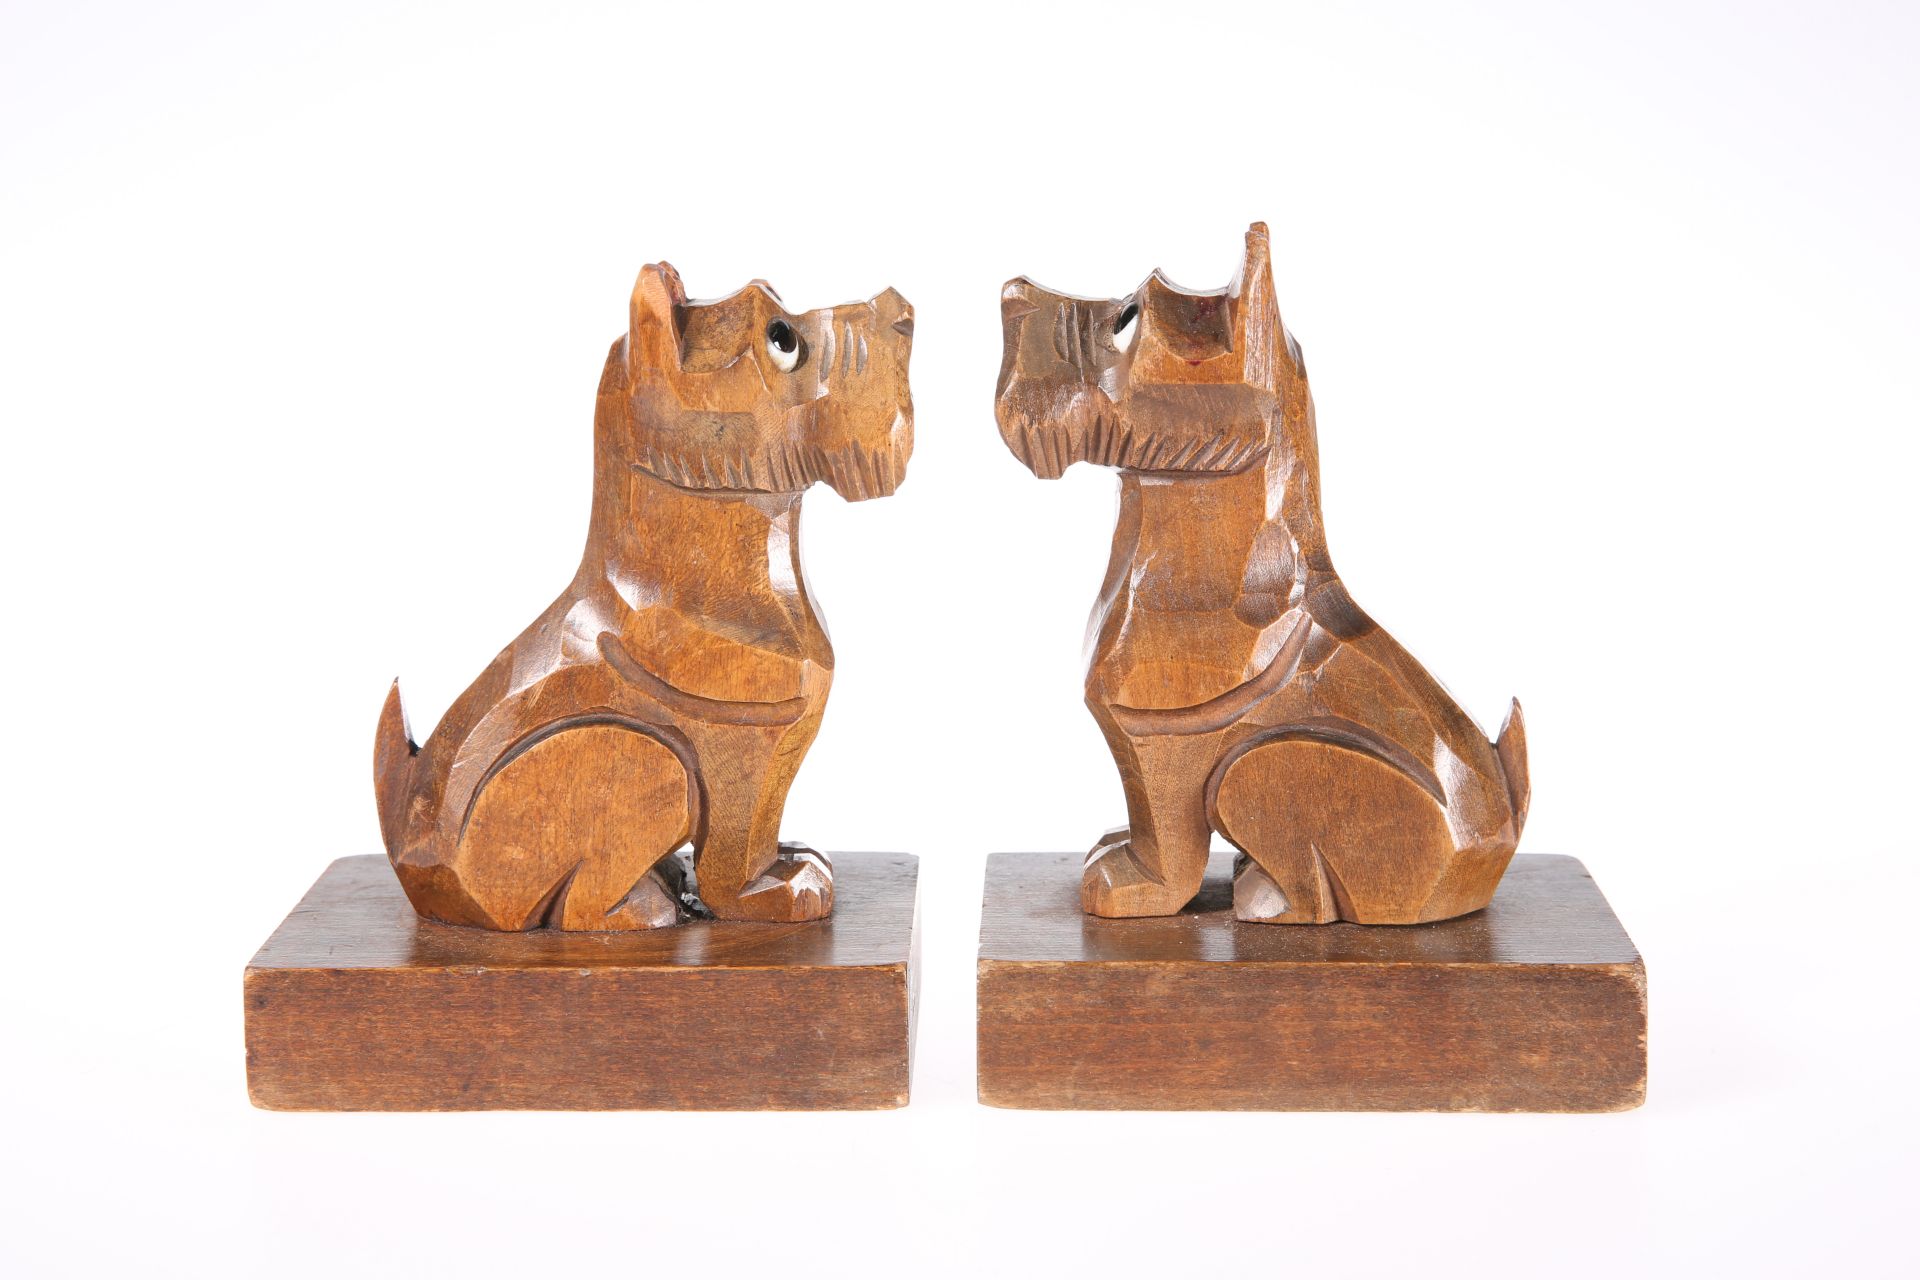 A PAIR OF EARLY 20TH CENTURY NOVELTY WOODEN BOOKENDS